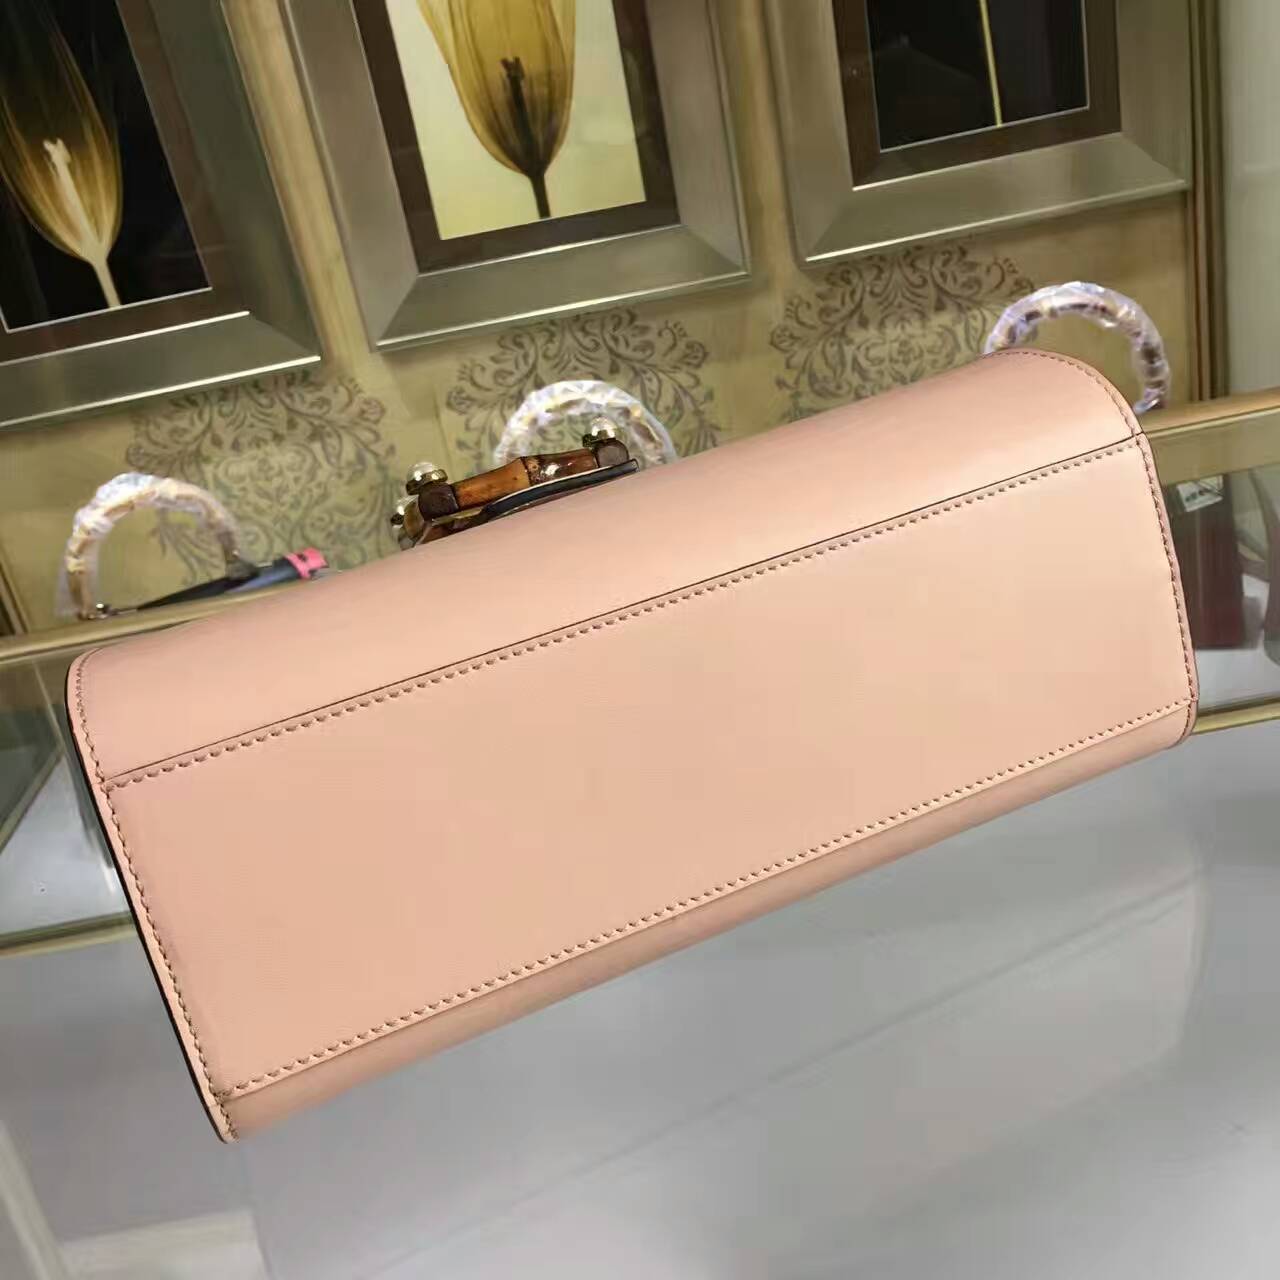 Gucci Nymphea leather top handle bag-453756